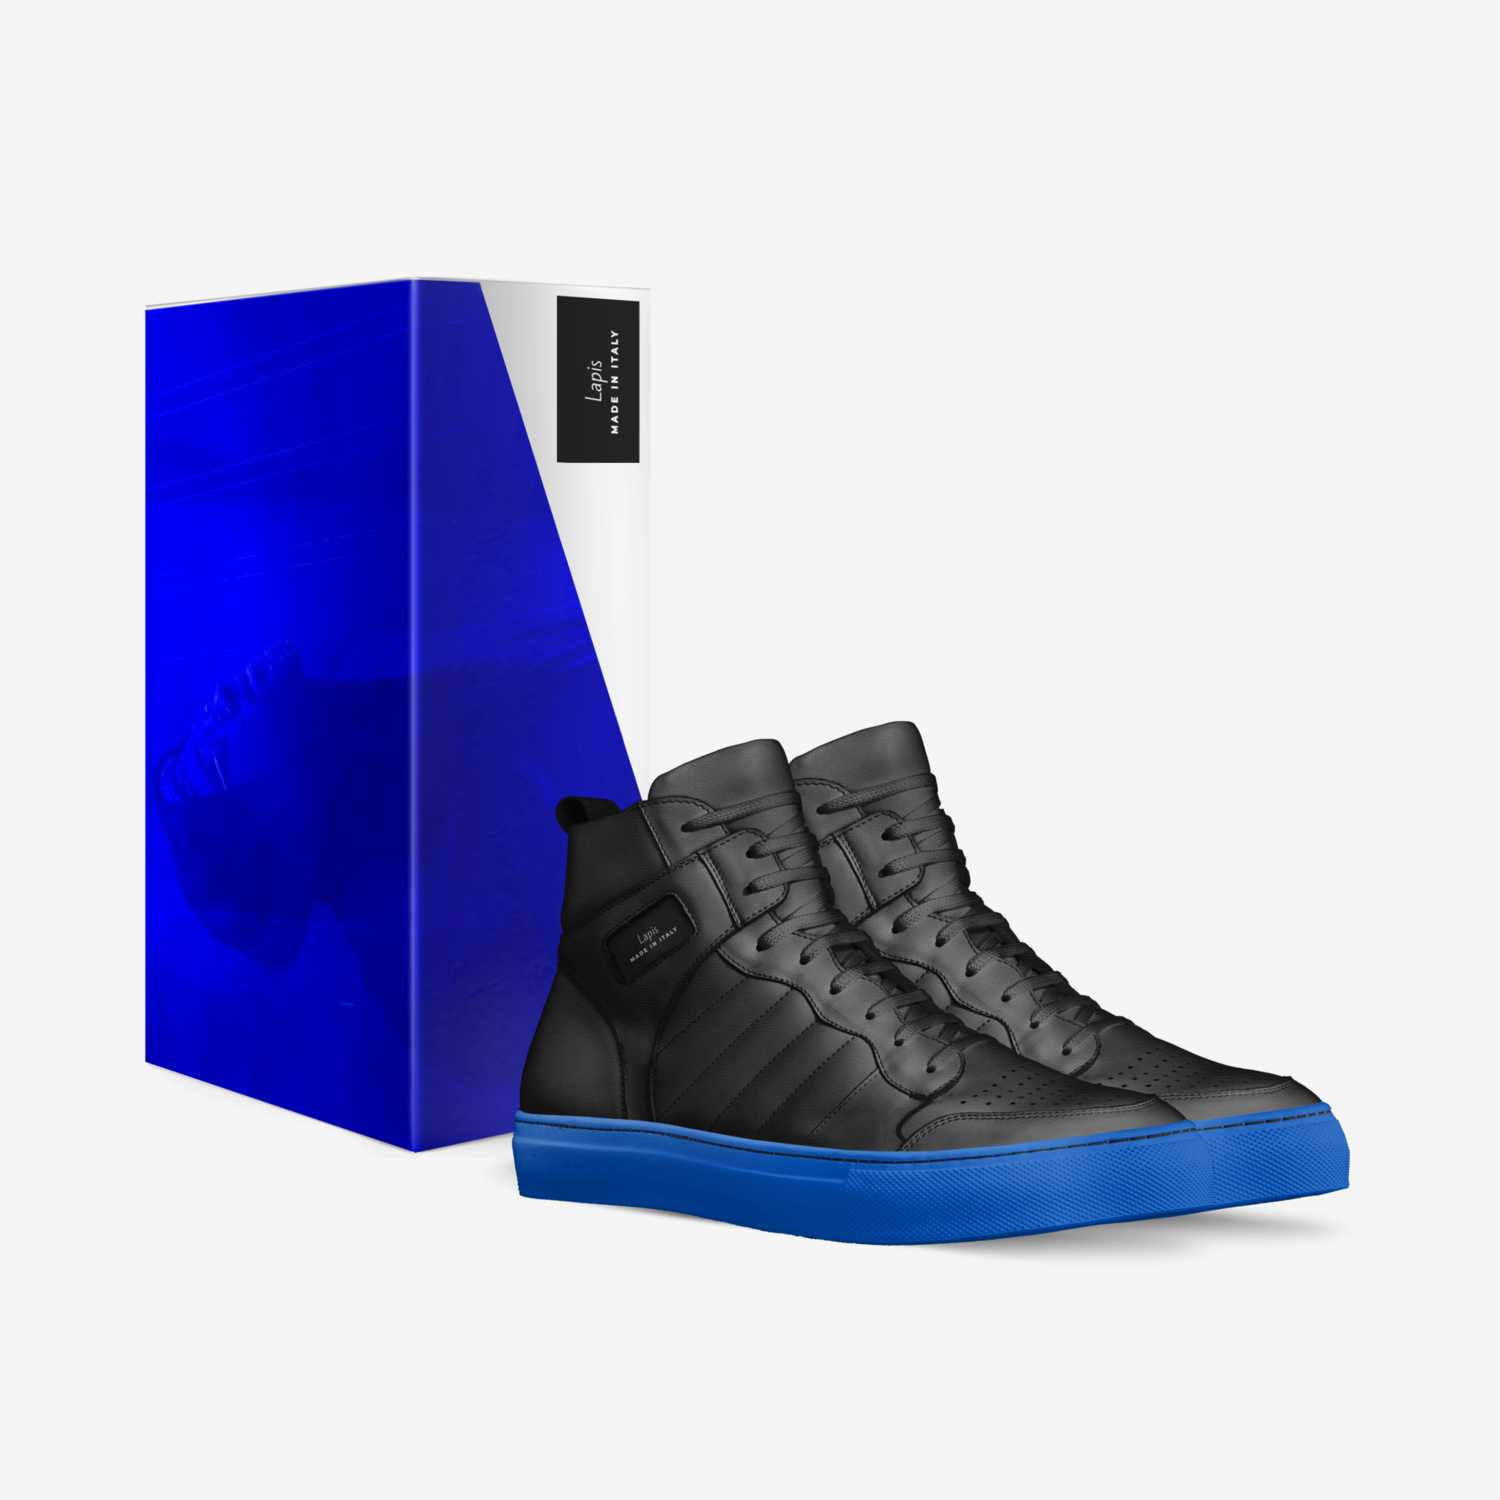 Lapis 818 custom made in Italy shoes by Ocean Von Lapis | Box view